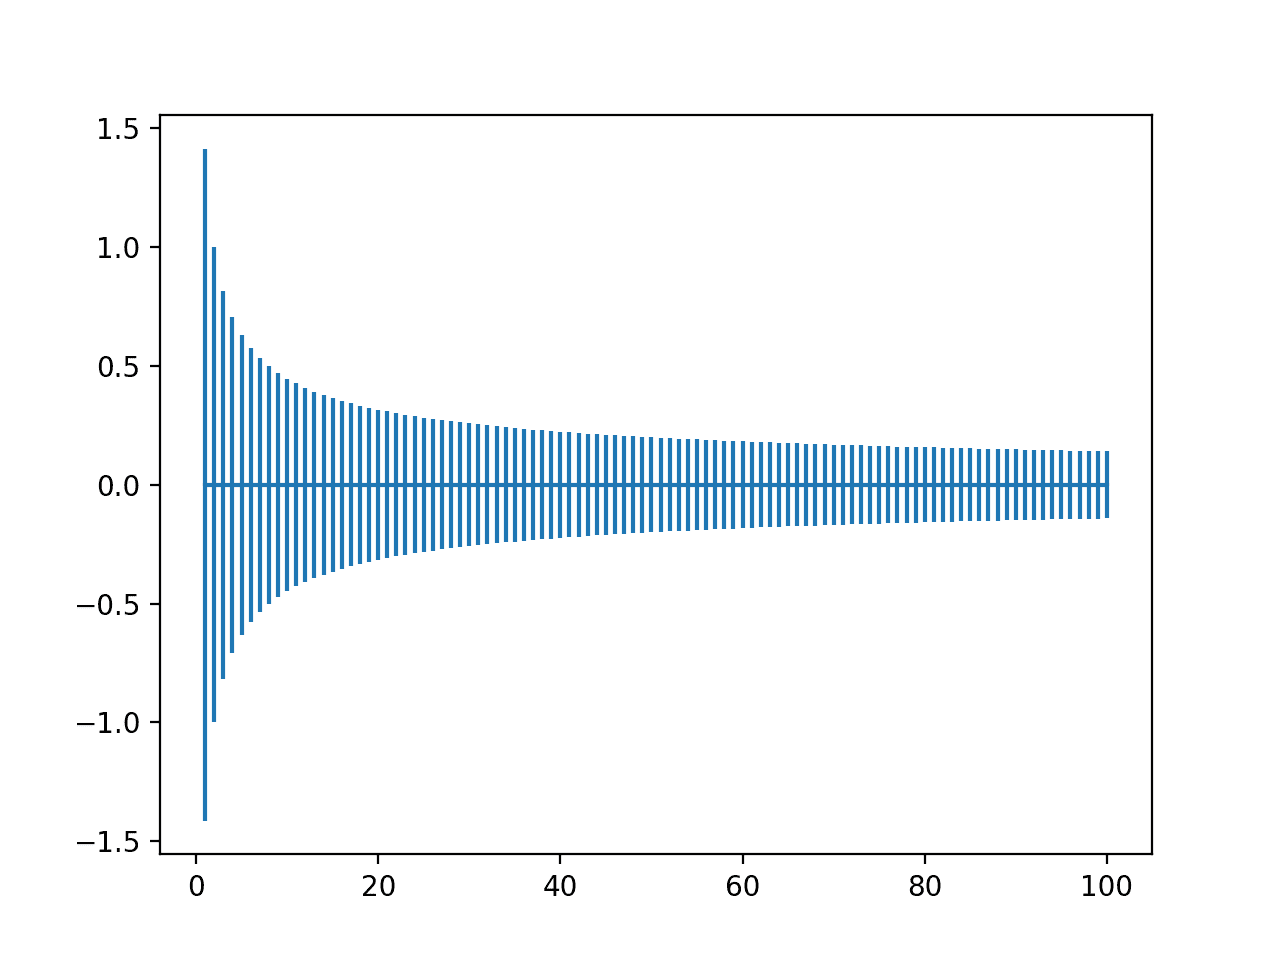 Plot of Range of He Weight Initialization With Inputs From One to One Hundred